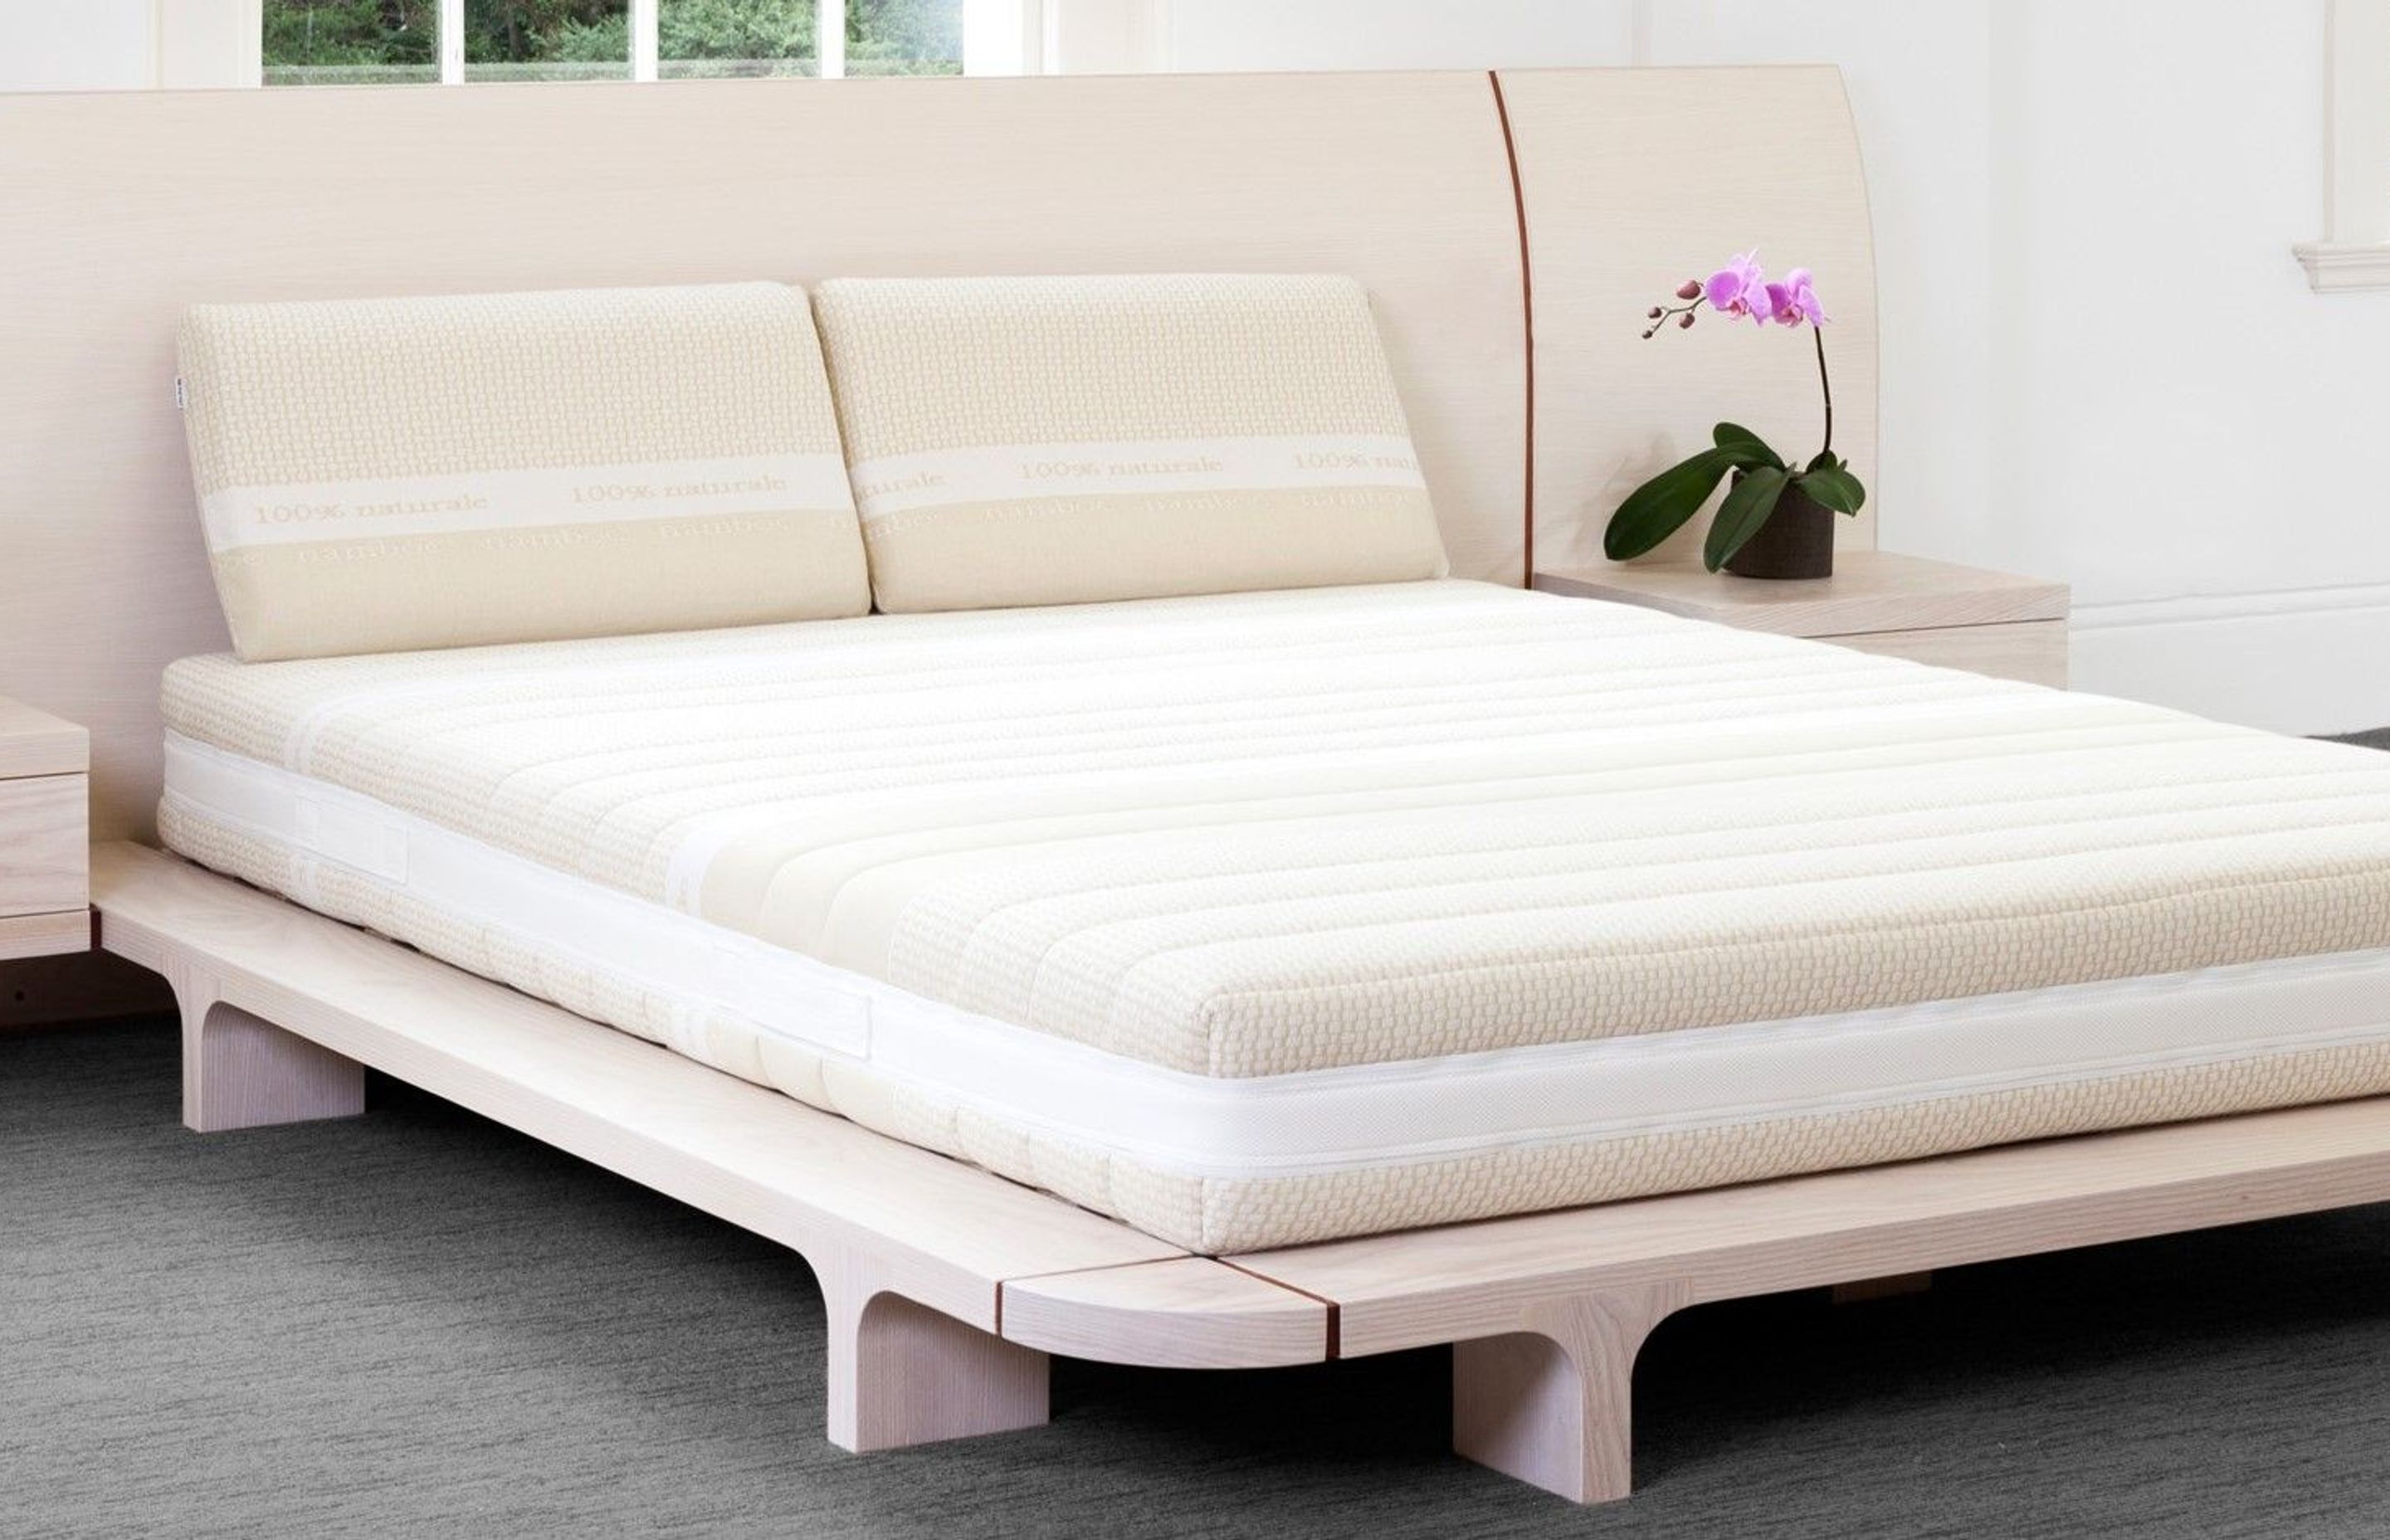 The Futonz Element mattress is made from natural latex.